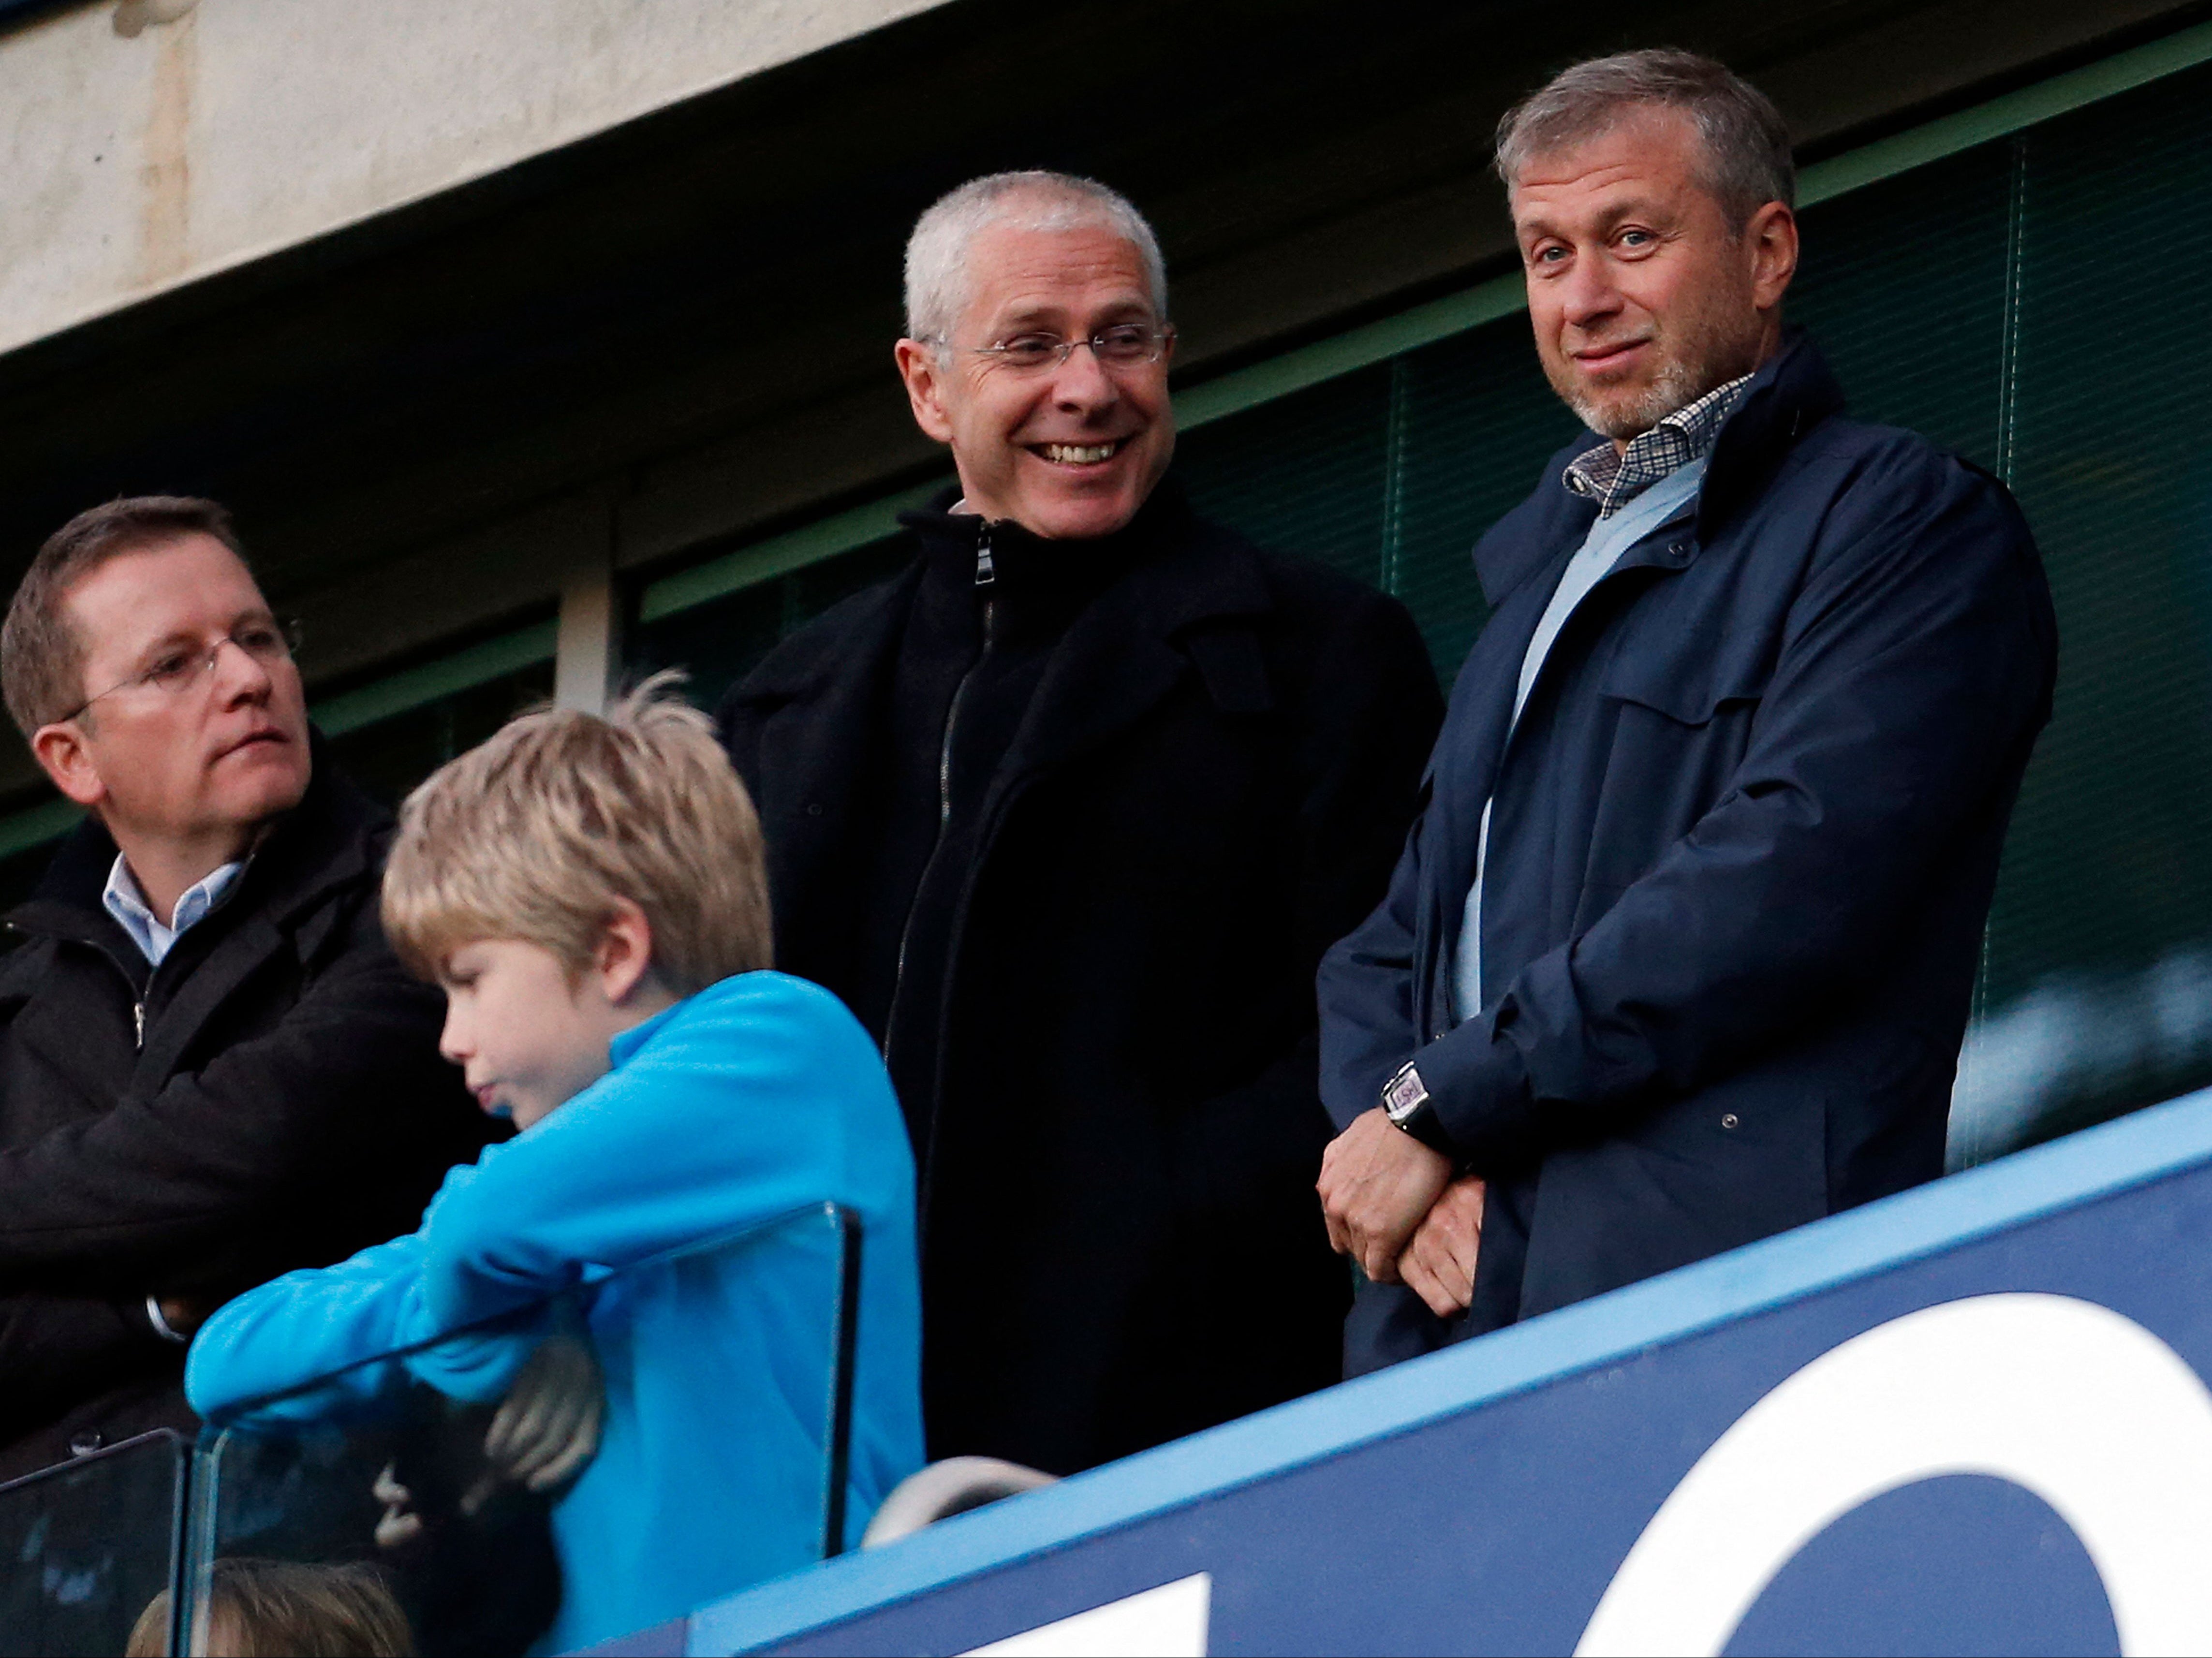 Chelsea FC owner Abramovich (far right) stands with director Tenenbaum (second from right) at Stamford Bridge in 2014